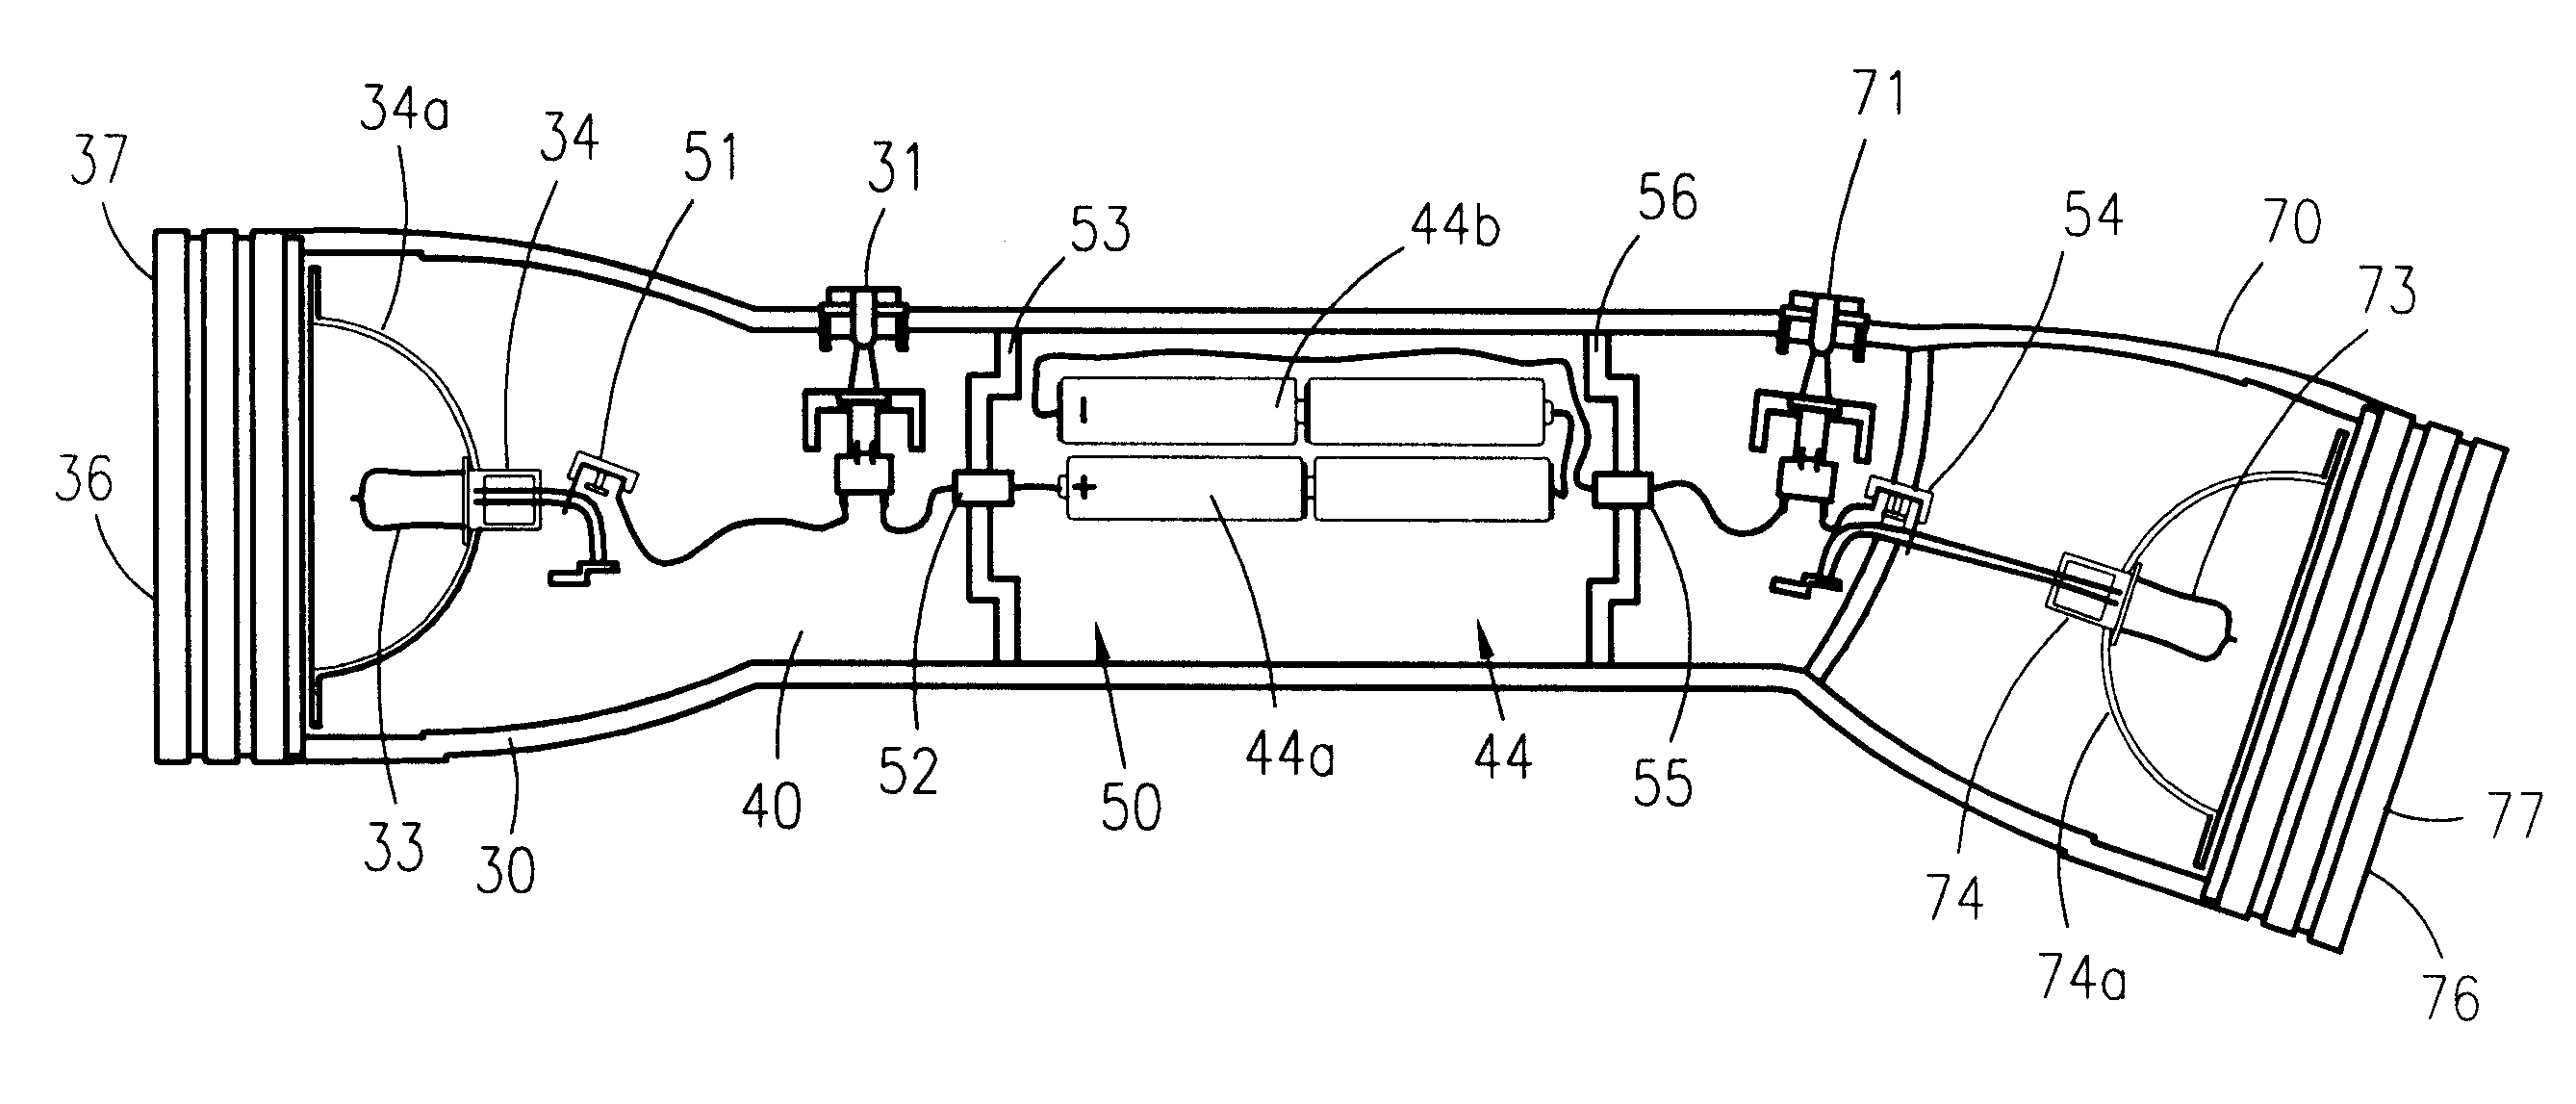 Dual-beam light assembly with adjustable posterior head